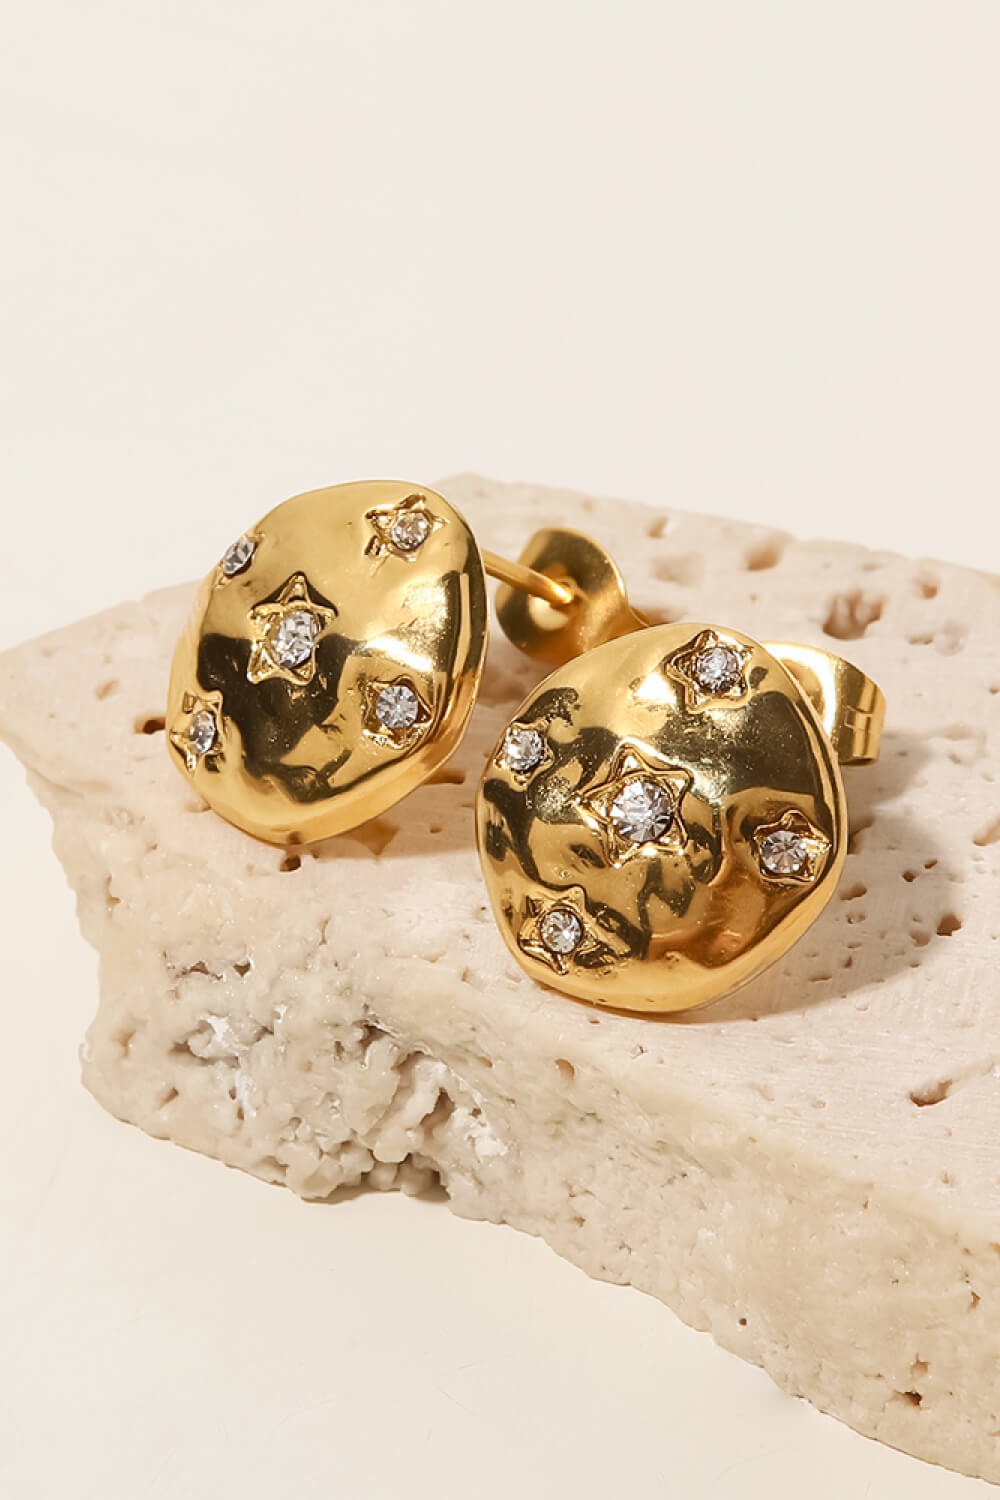 Cecilia 18K Gold-Plated Cubic Zirconia Stud Earrings